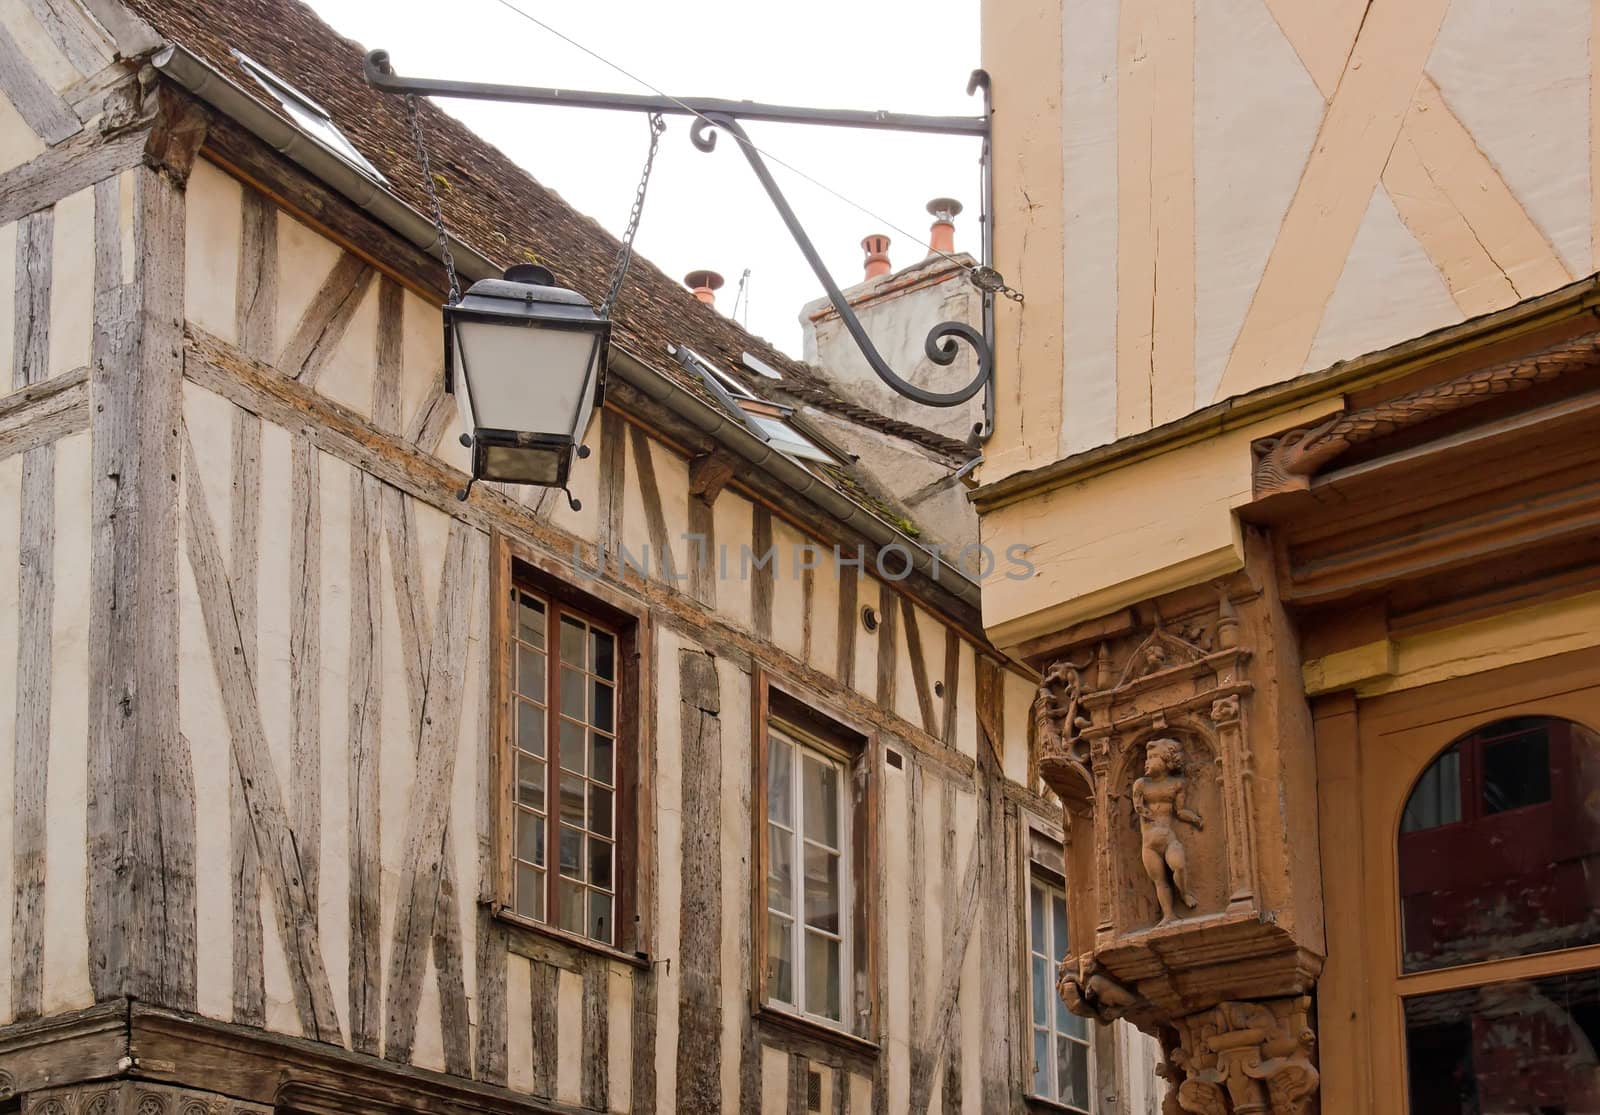 city of Auxerre, medieval decoration in the angle of a street  (Burgundy France) by neko92vl